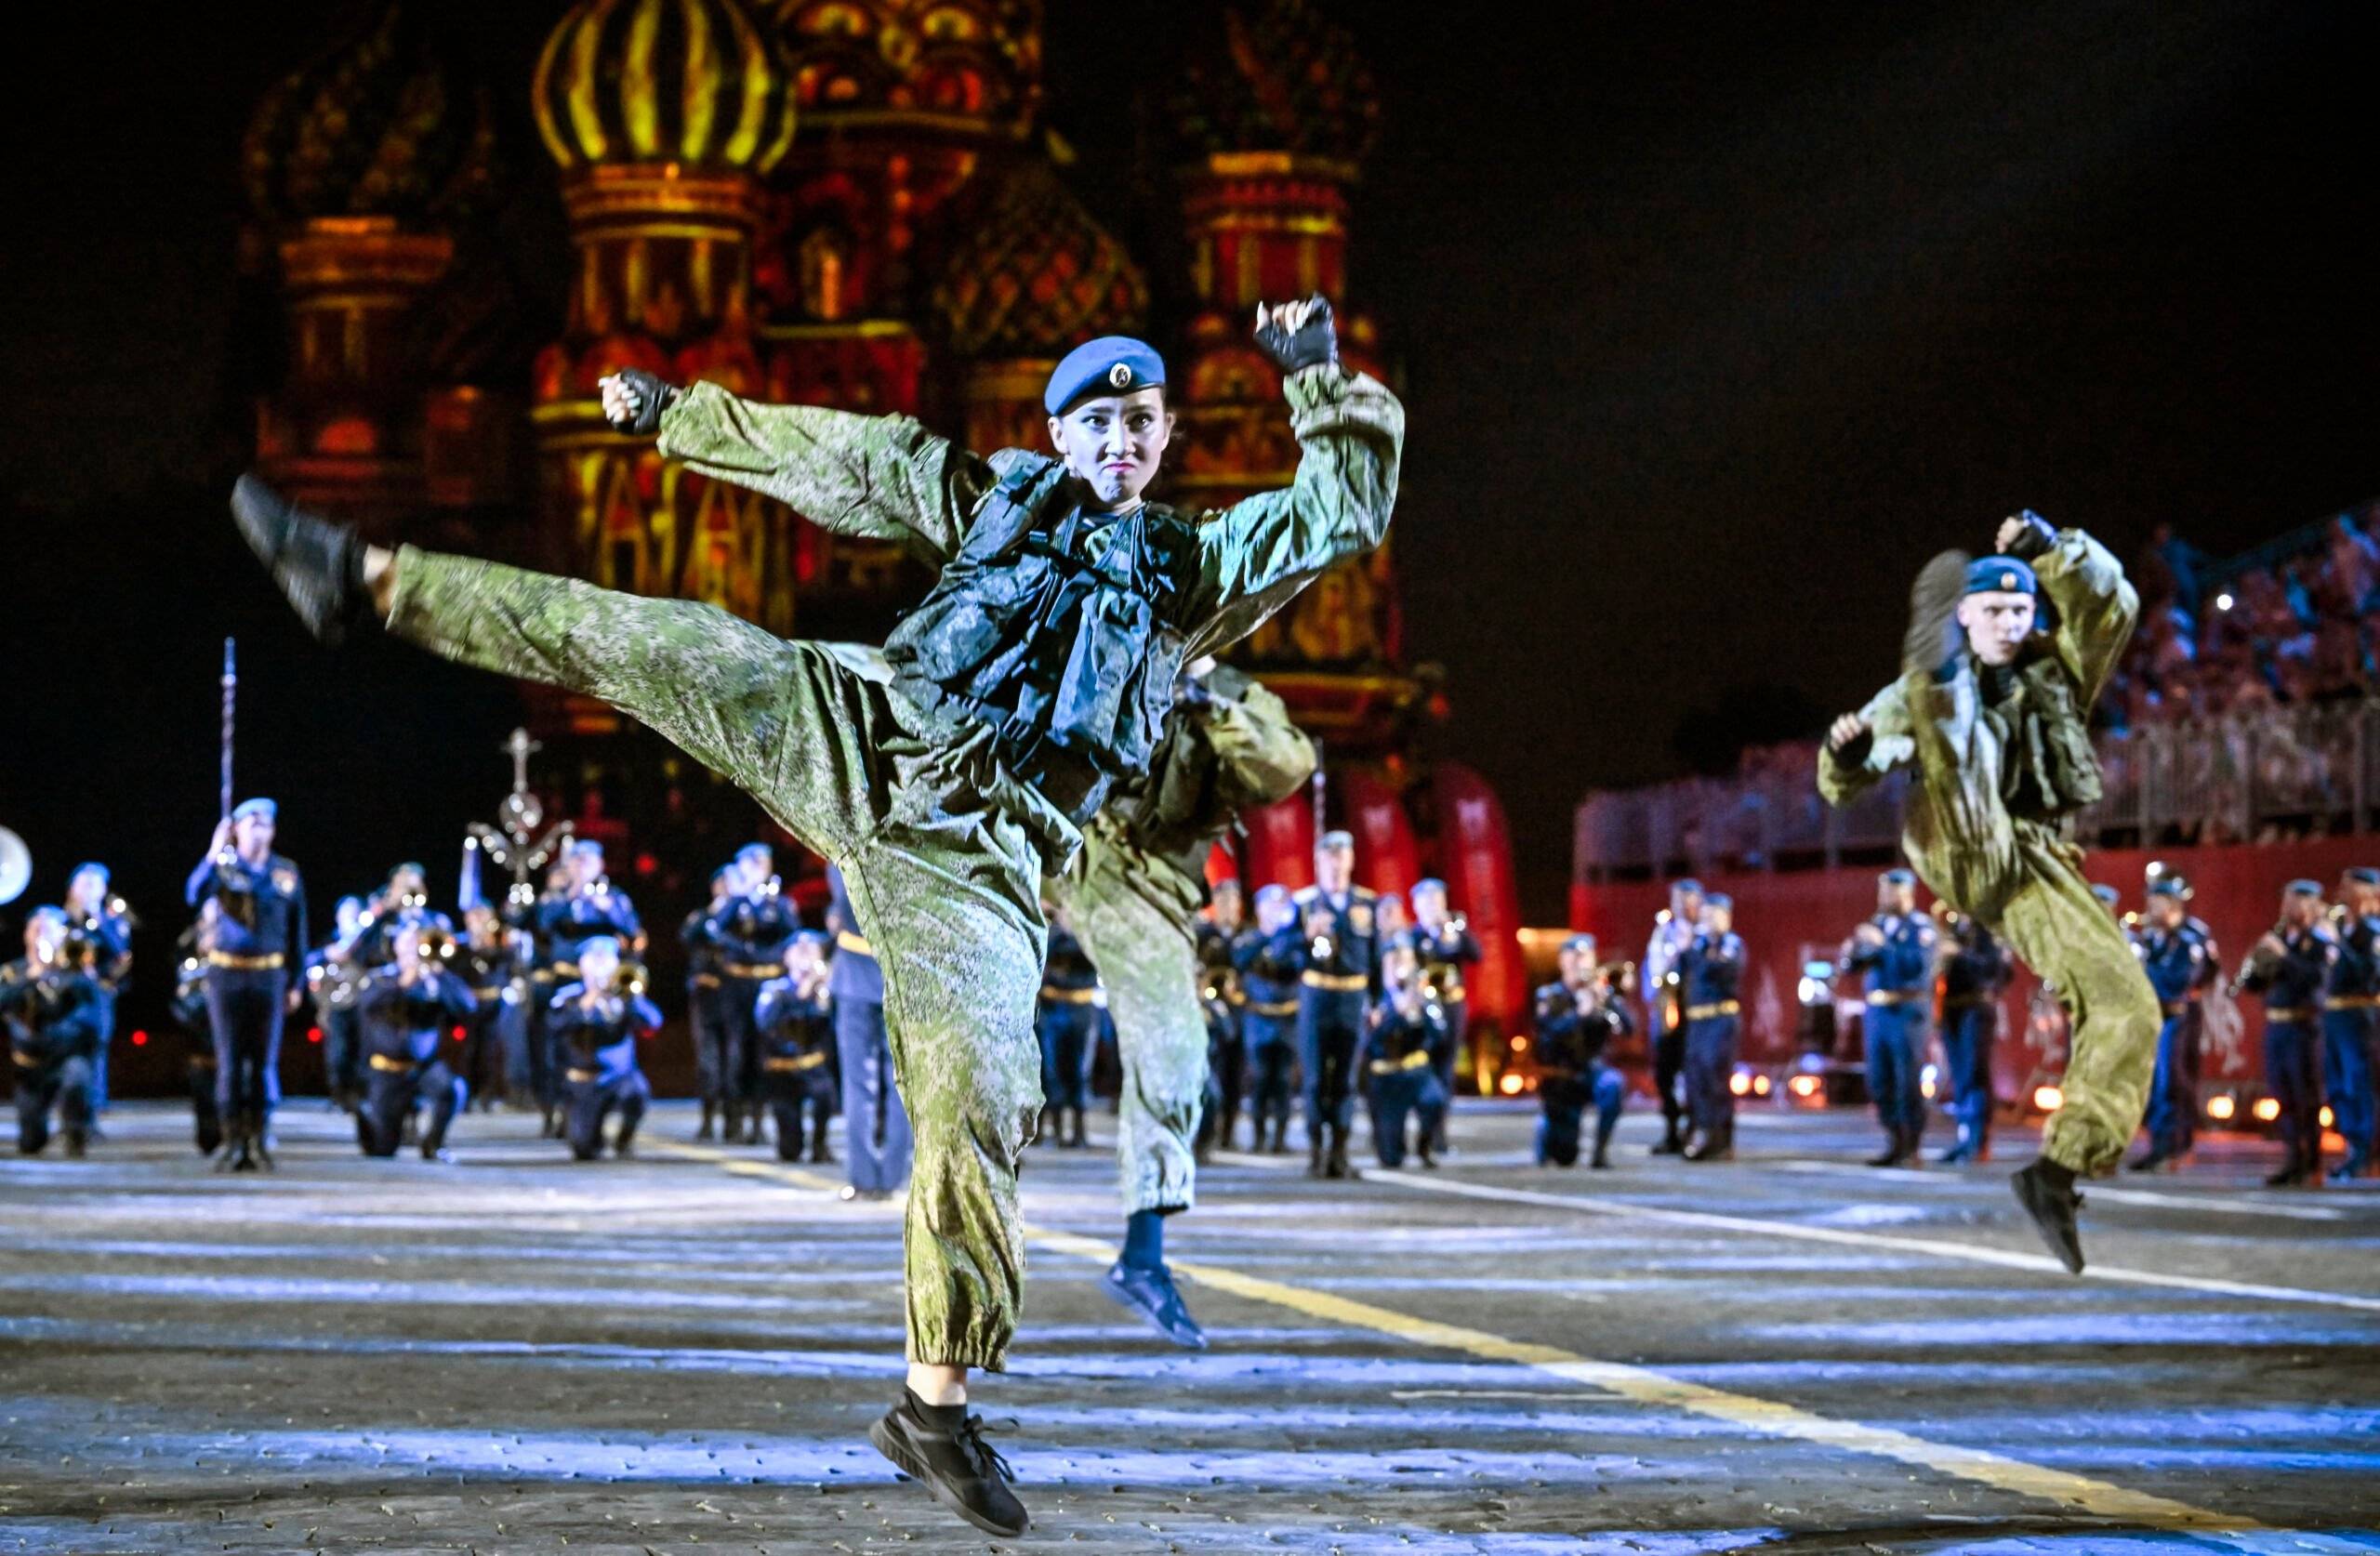 Russian paratroopers perform at the Red Square during the "Spasskaya Tower" international military music festival at the Red Square in Moscow on August 26, 2022. (Photo by Alexander NEMENOV / AFP)